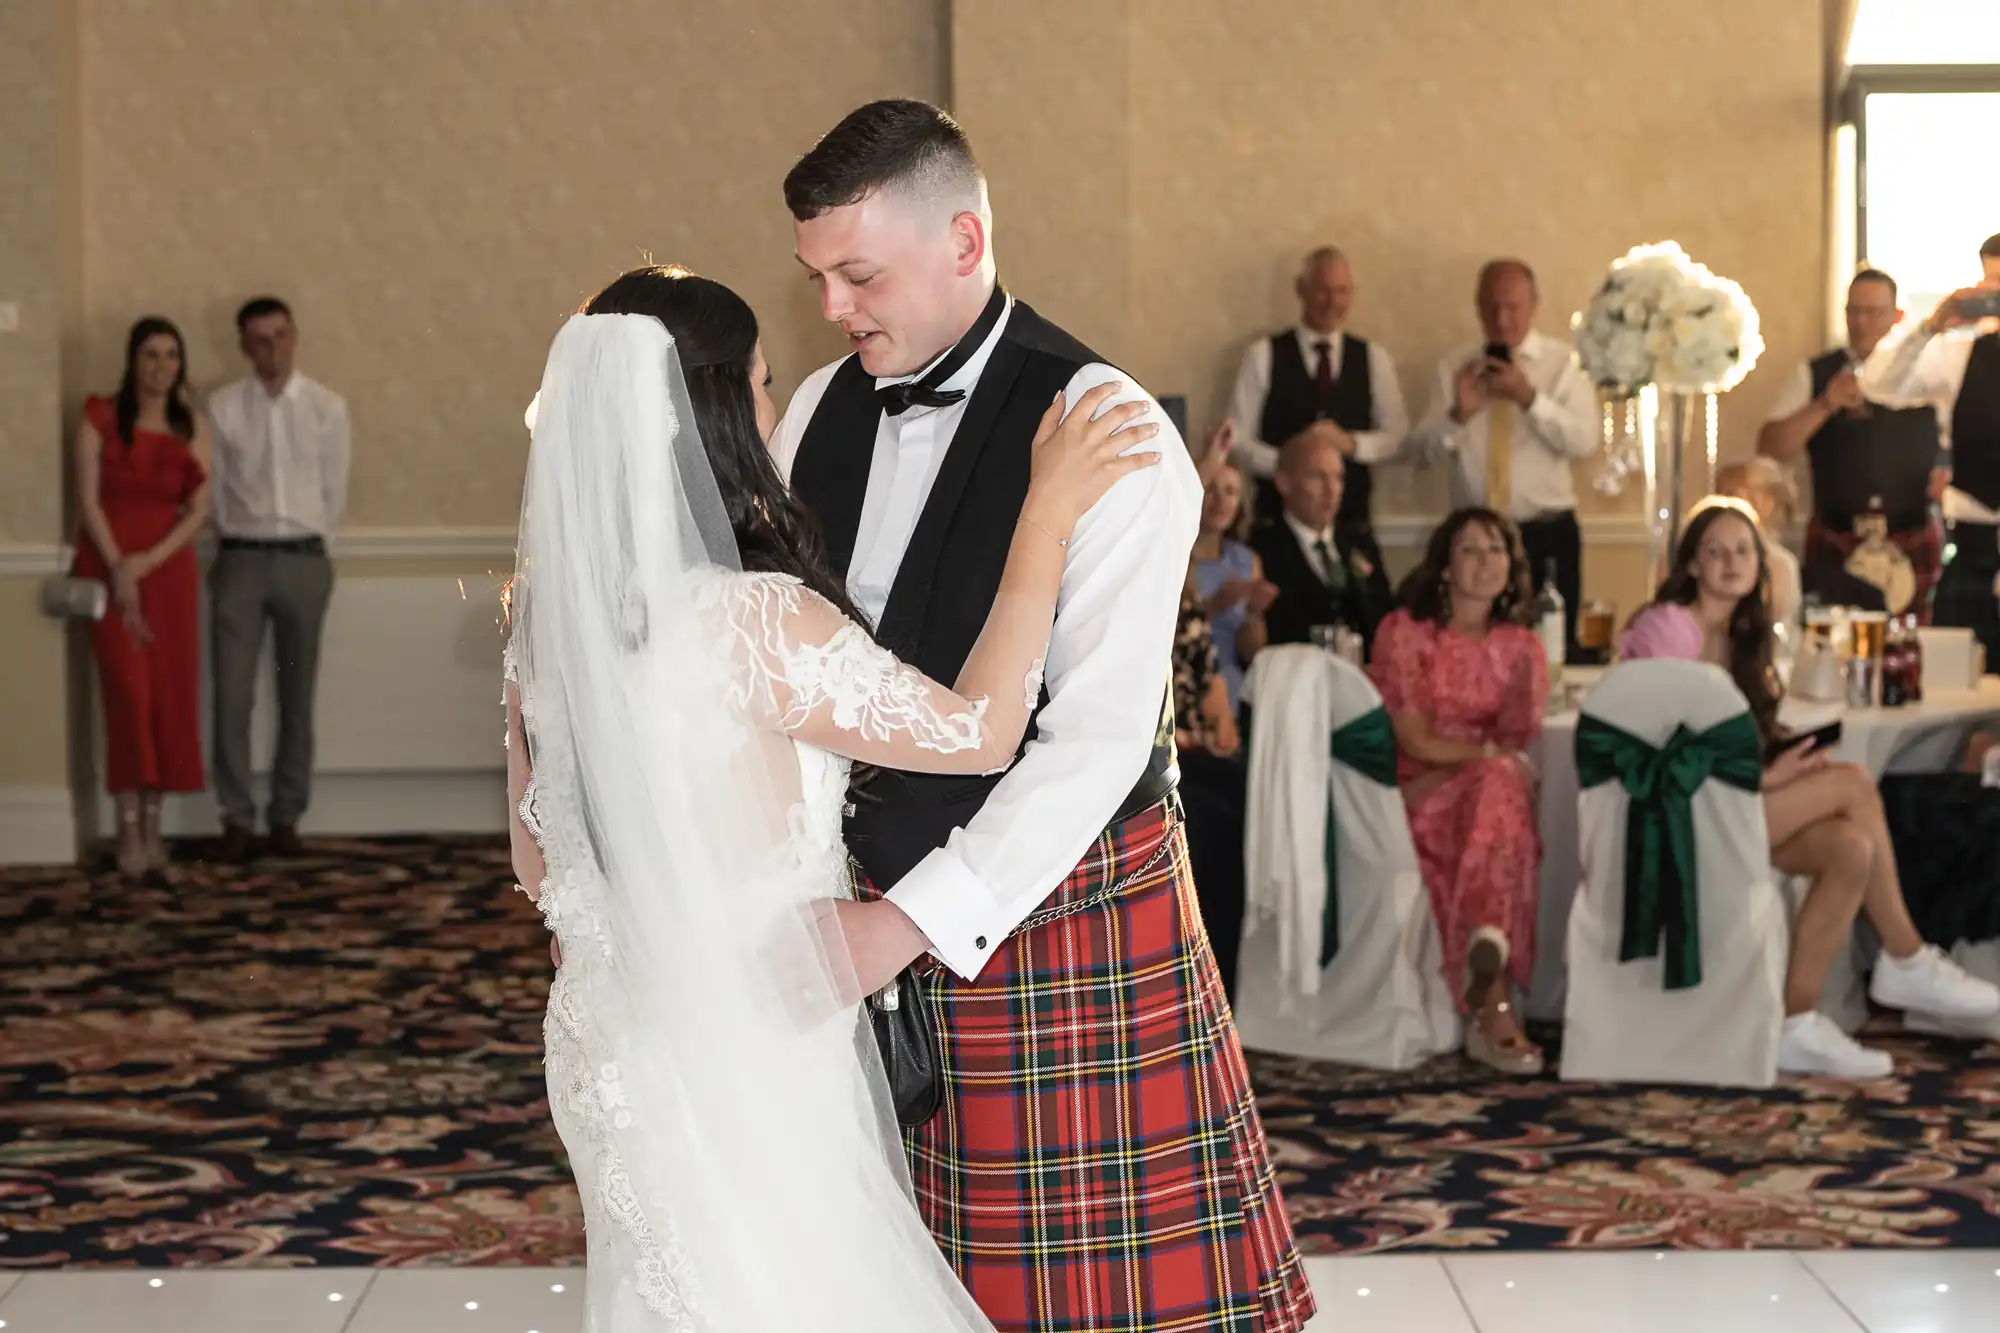 A bride and groom share their first dance at their wedding reception, surrounded by guests, with the groom wearing a kilt.